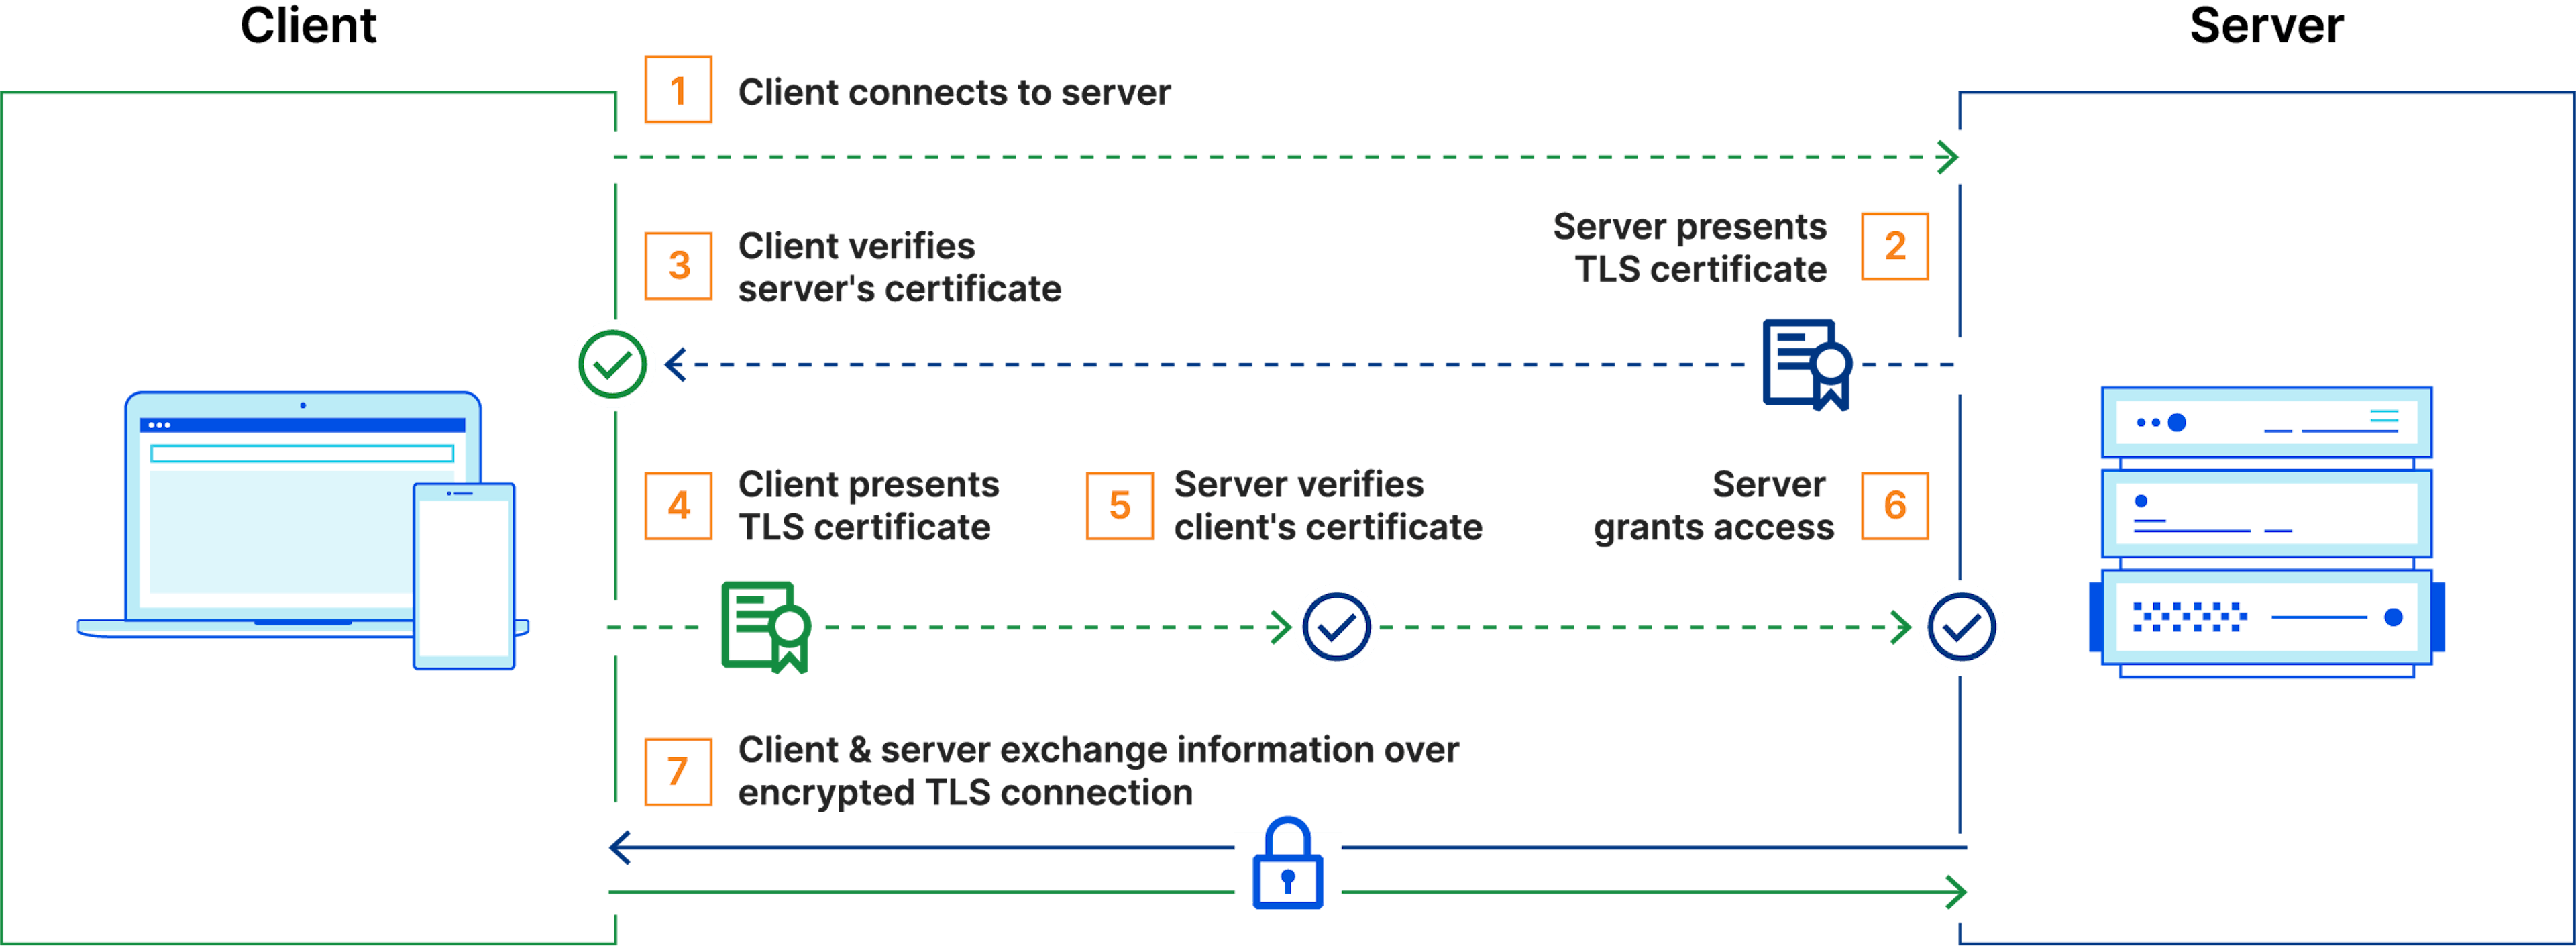 How mTLS works (source: https://www.cloudflare.com/en-in/learning/access-management/what-is-mutual-tls/) 